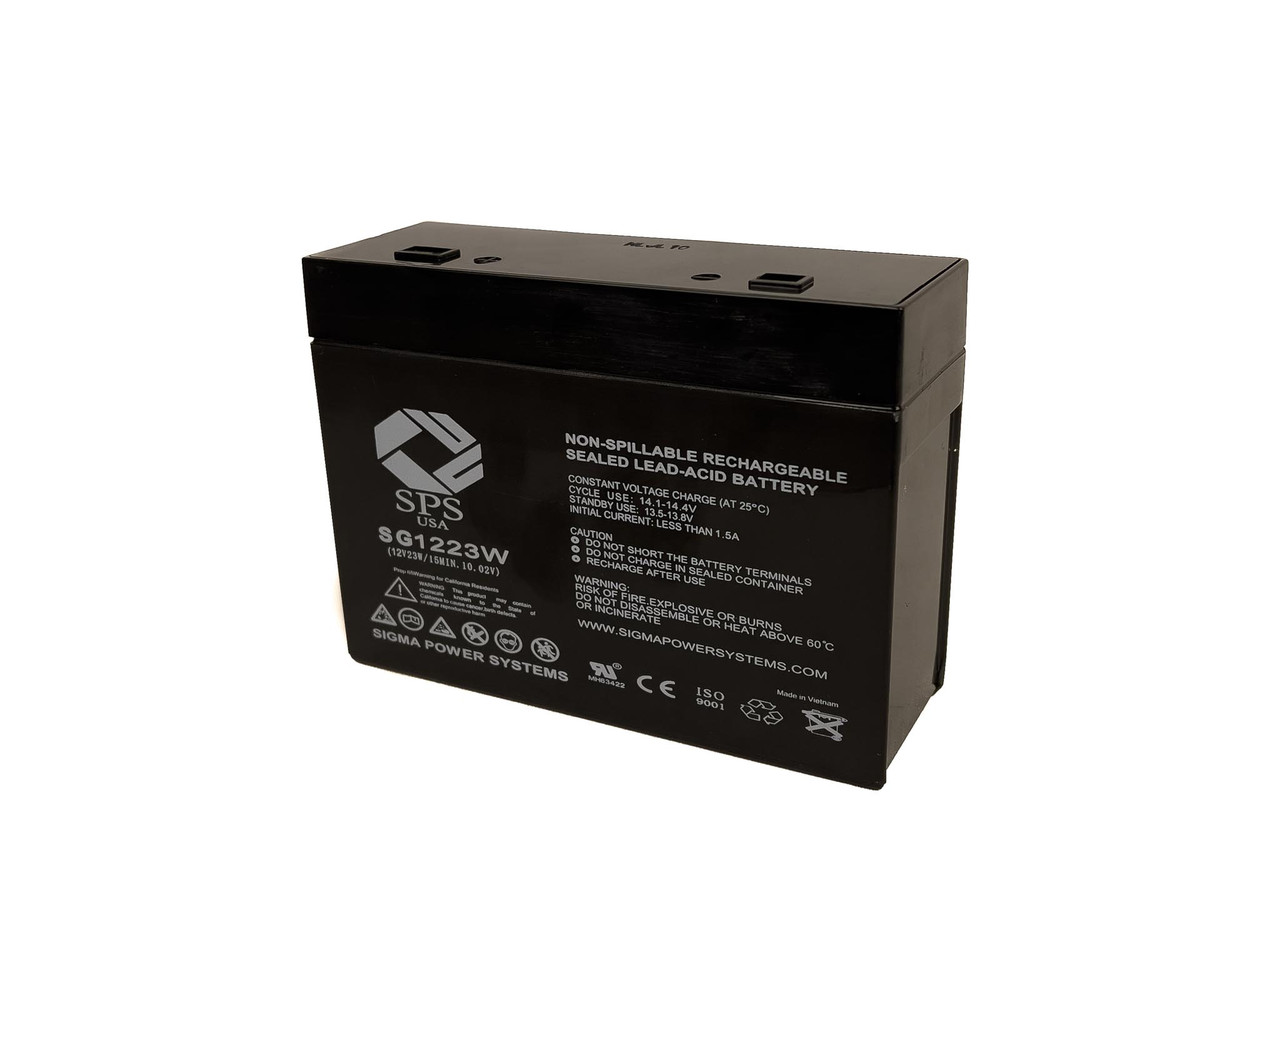 Raion Power 12V 5.2Ah 23W Non-Spillable Replacement Battery for Sunnyway SW1223W